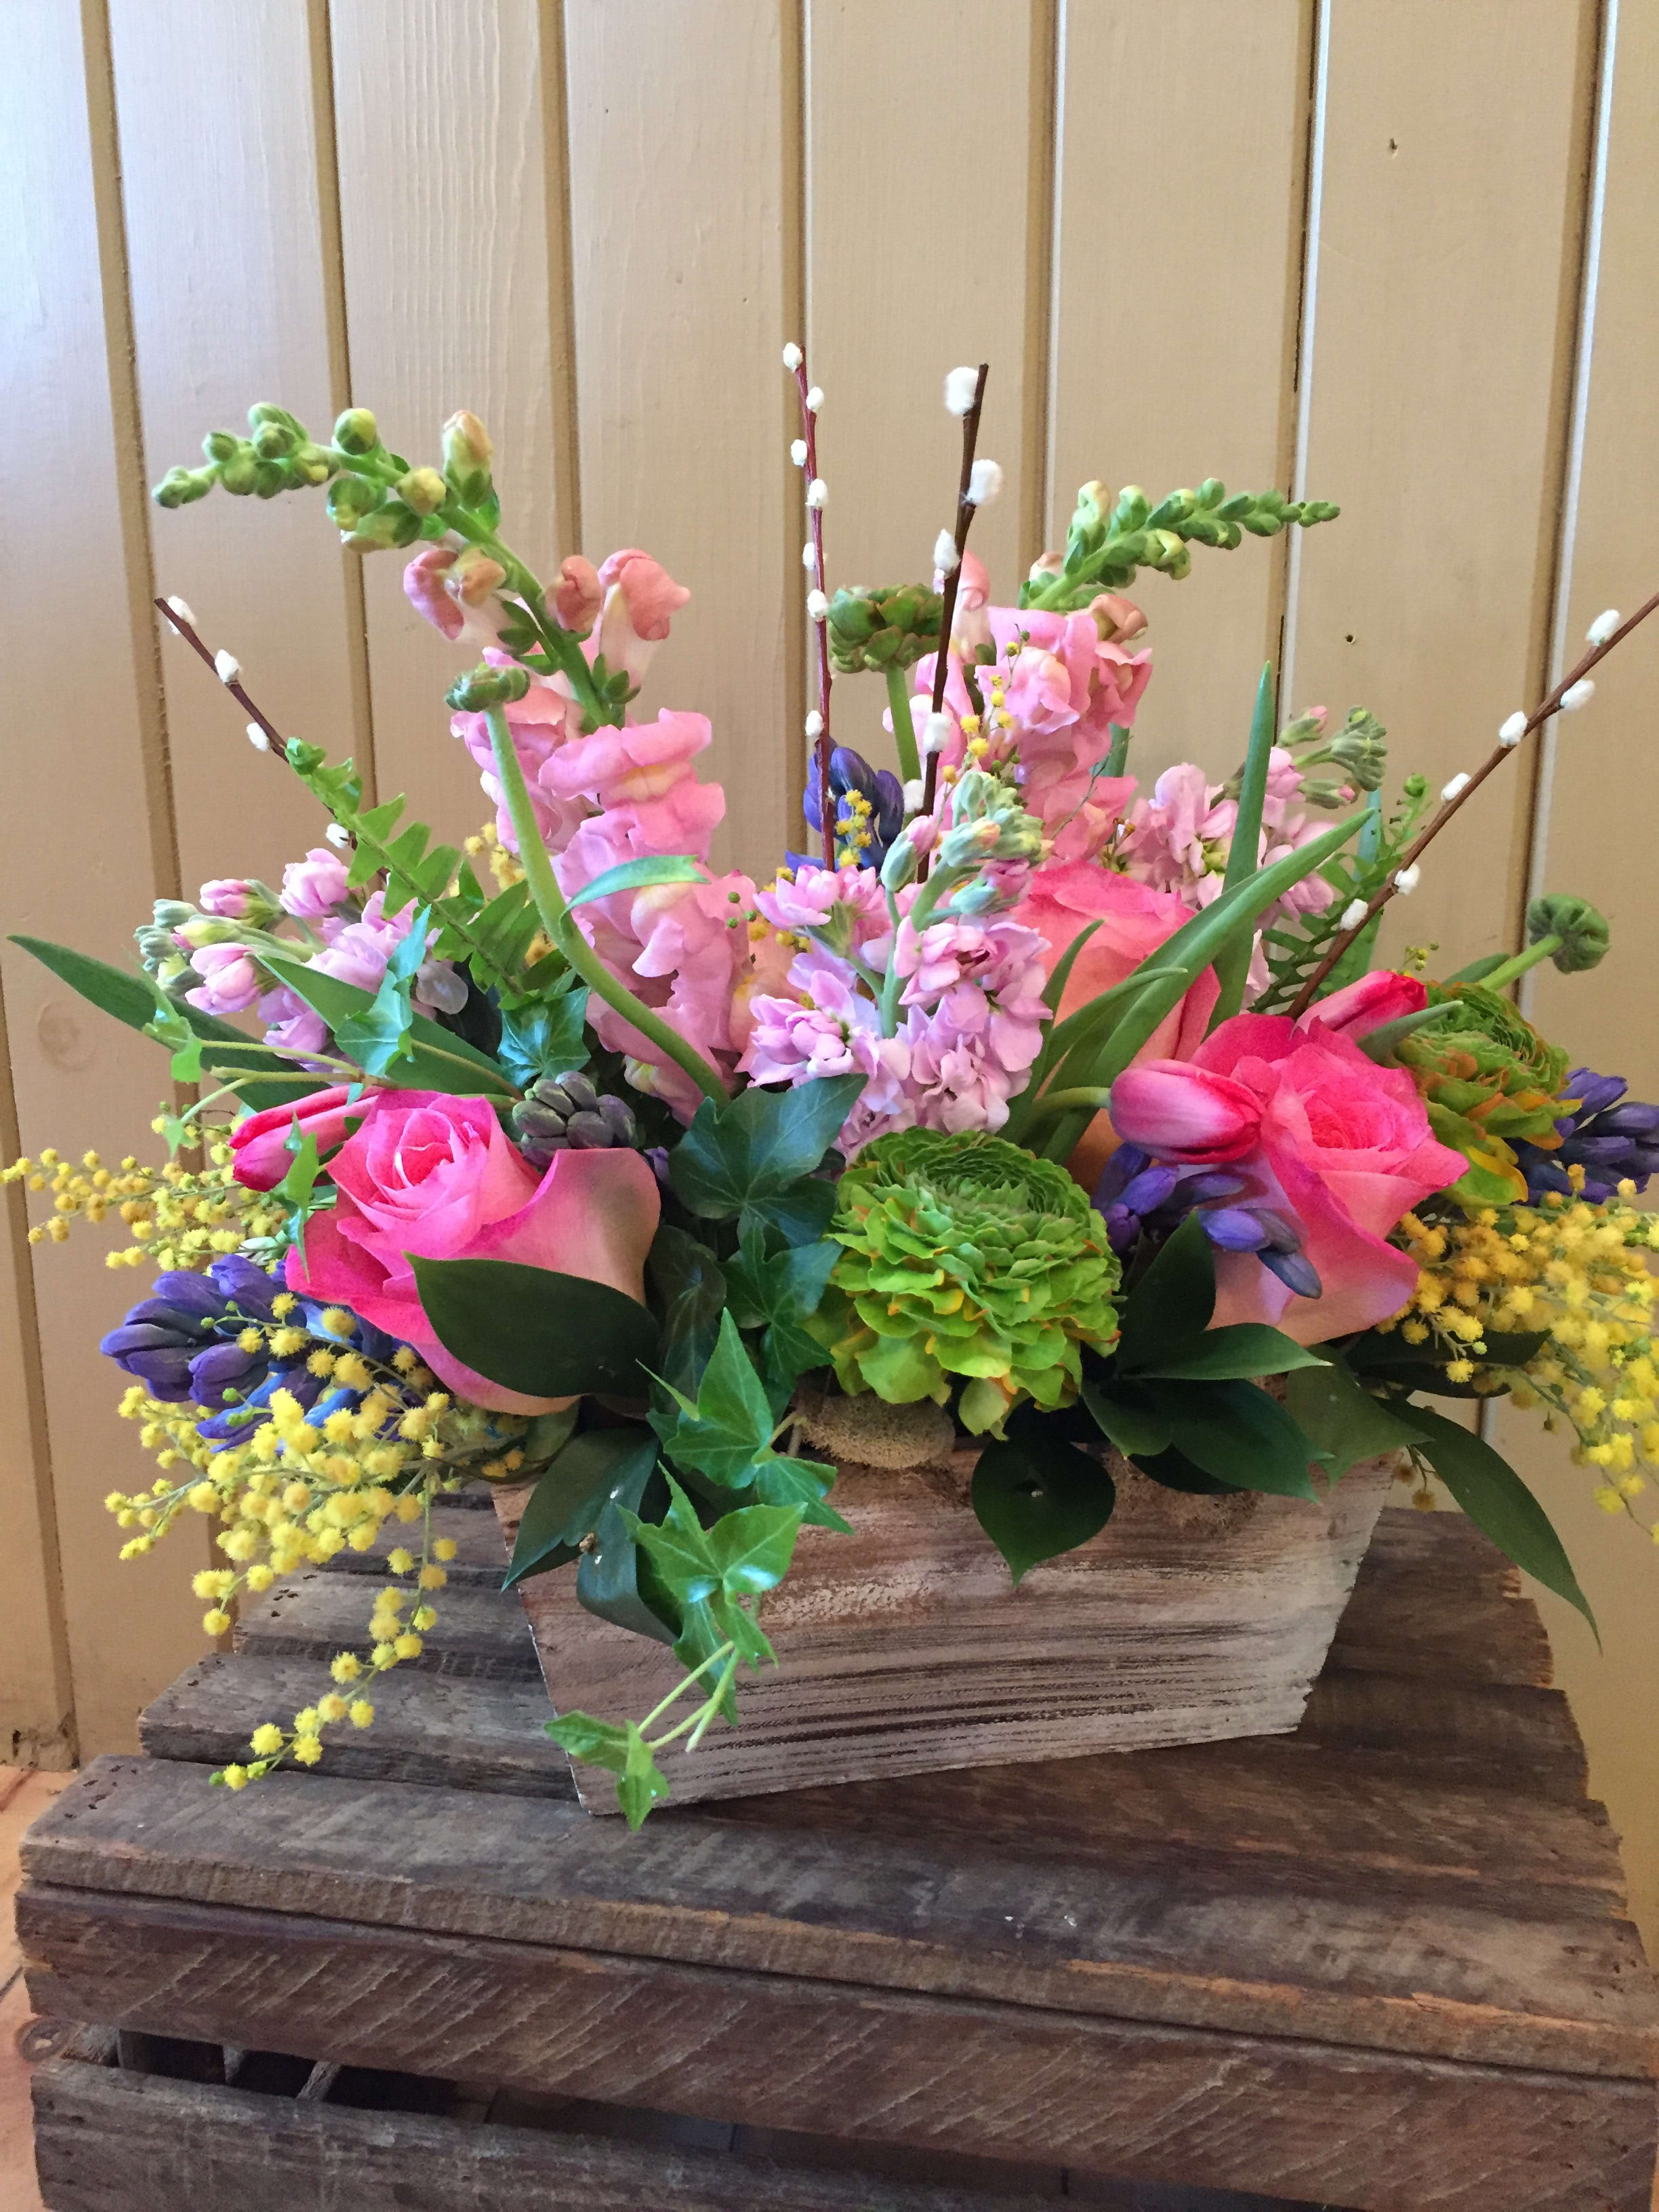 Spring Box - A springy mix of tulips, snapdragons, roses and hyacinths accented with fuzzy pussy willow branches.  This arrangement will have you thinking of warmer days.